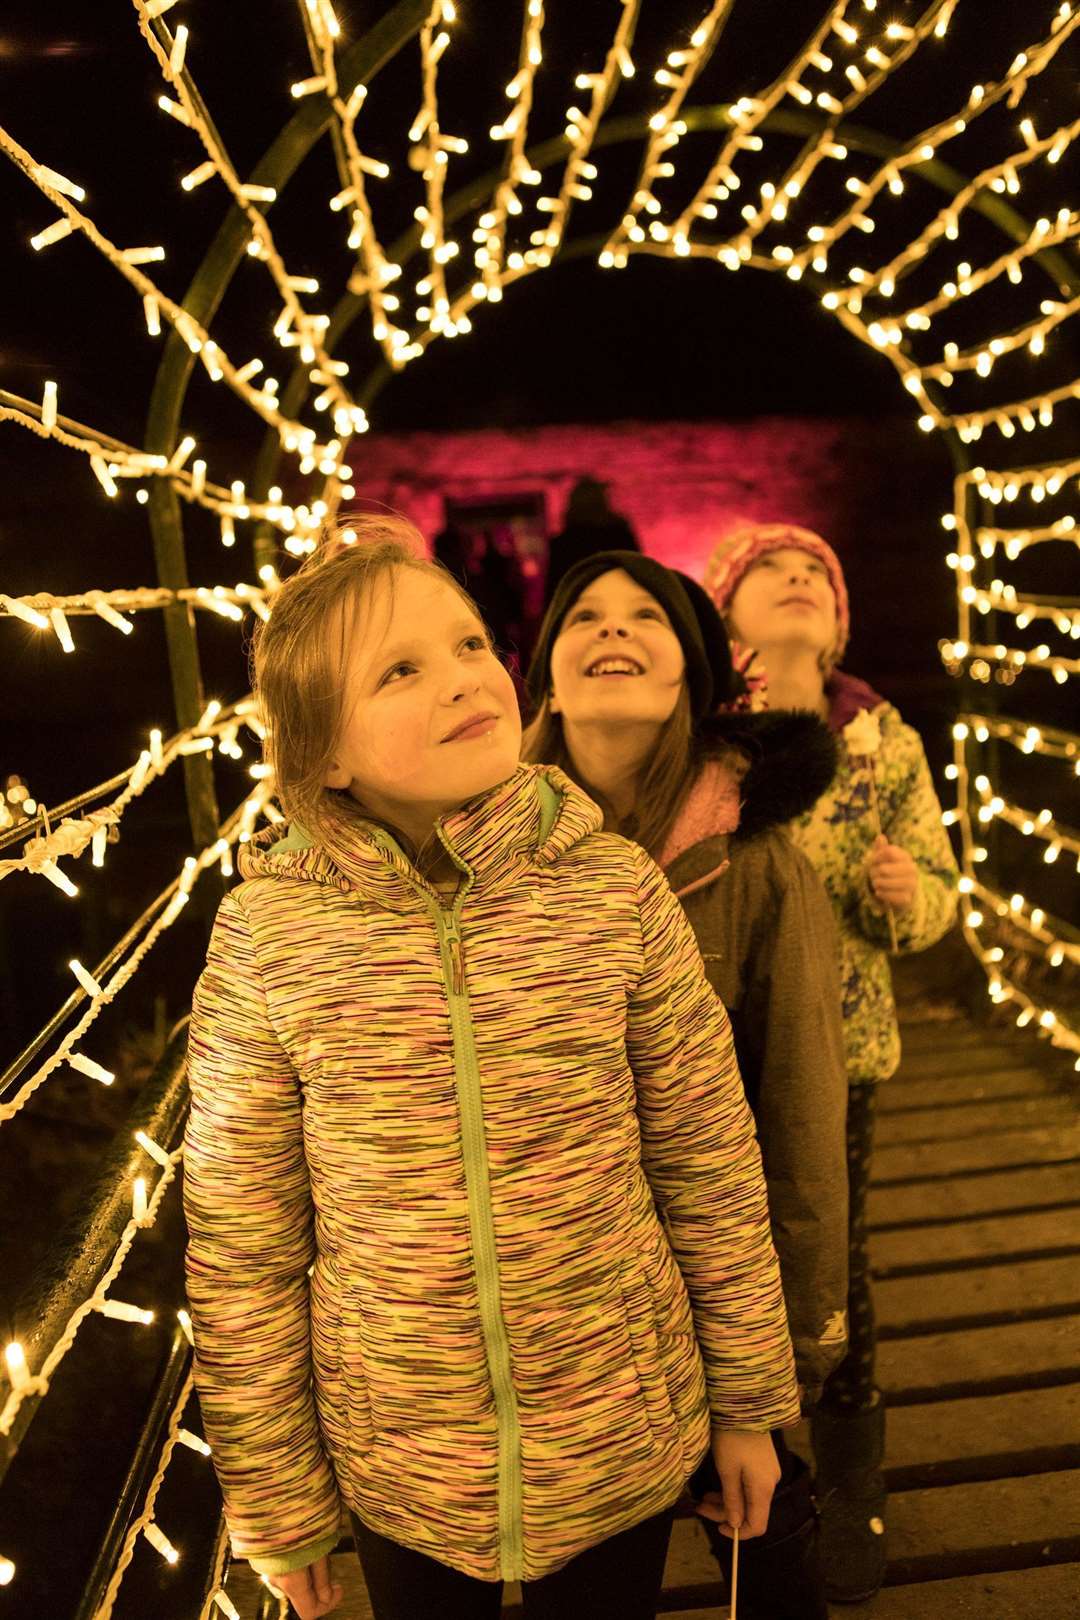 Audley End House's magical Christmas festival, Enchanted, returns this year